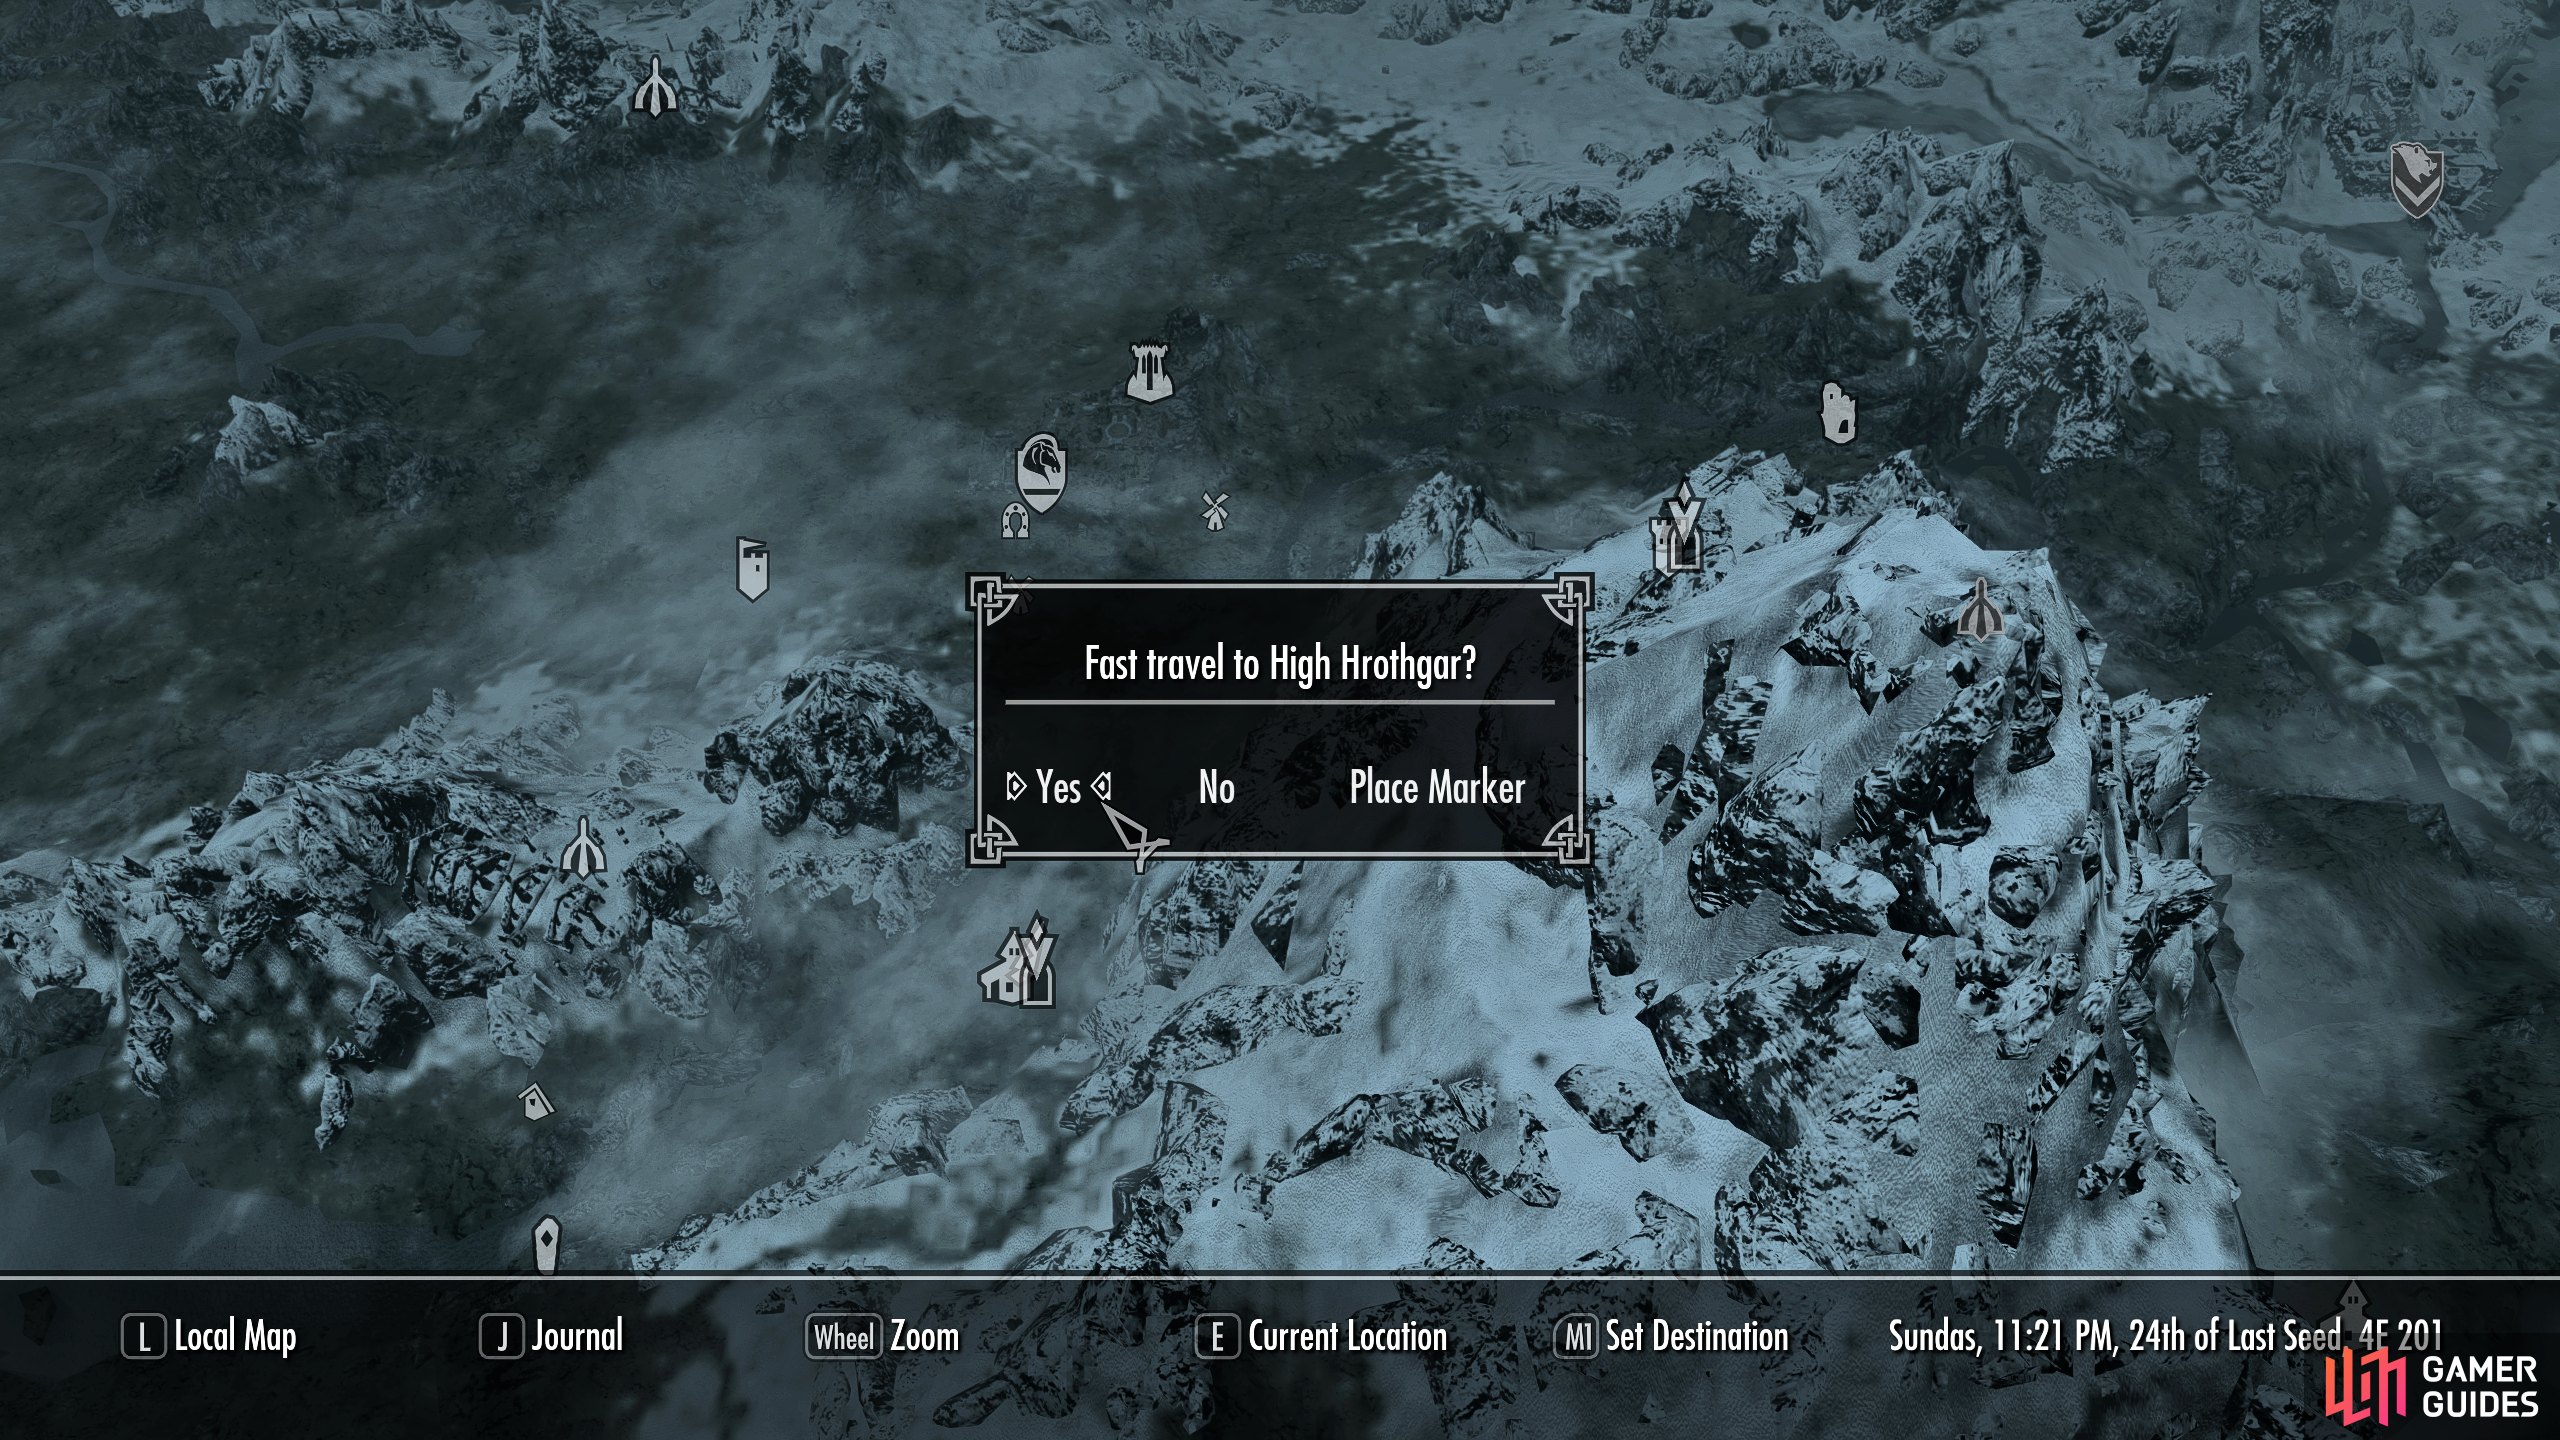 You can fast travel to High Hrothgar to deliver the horn to the Greybeards.